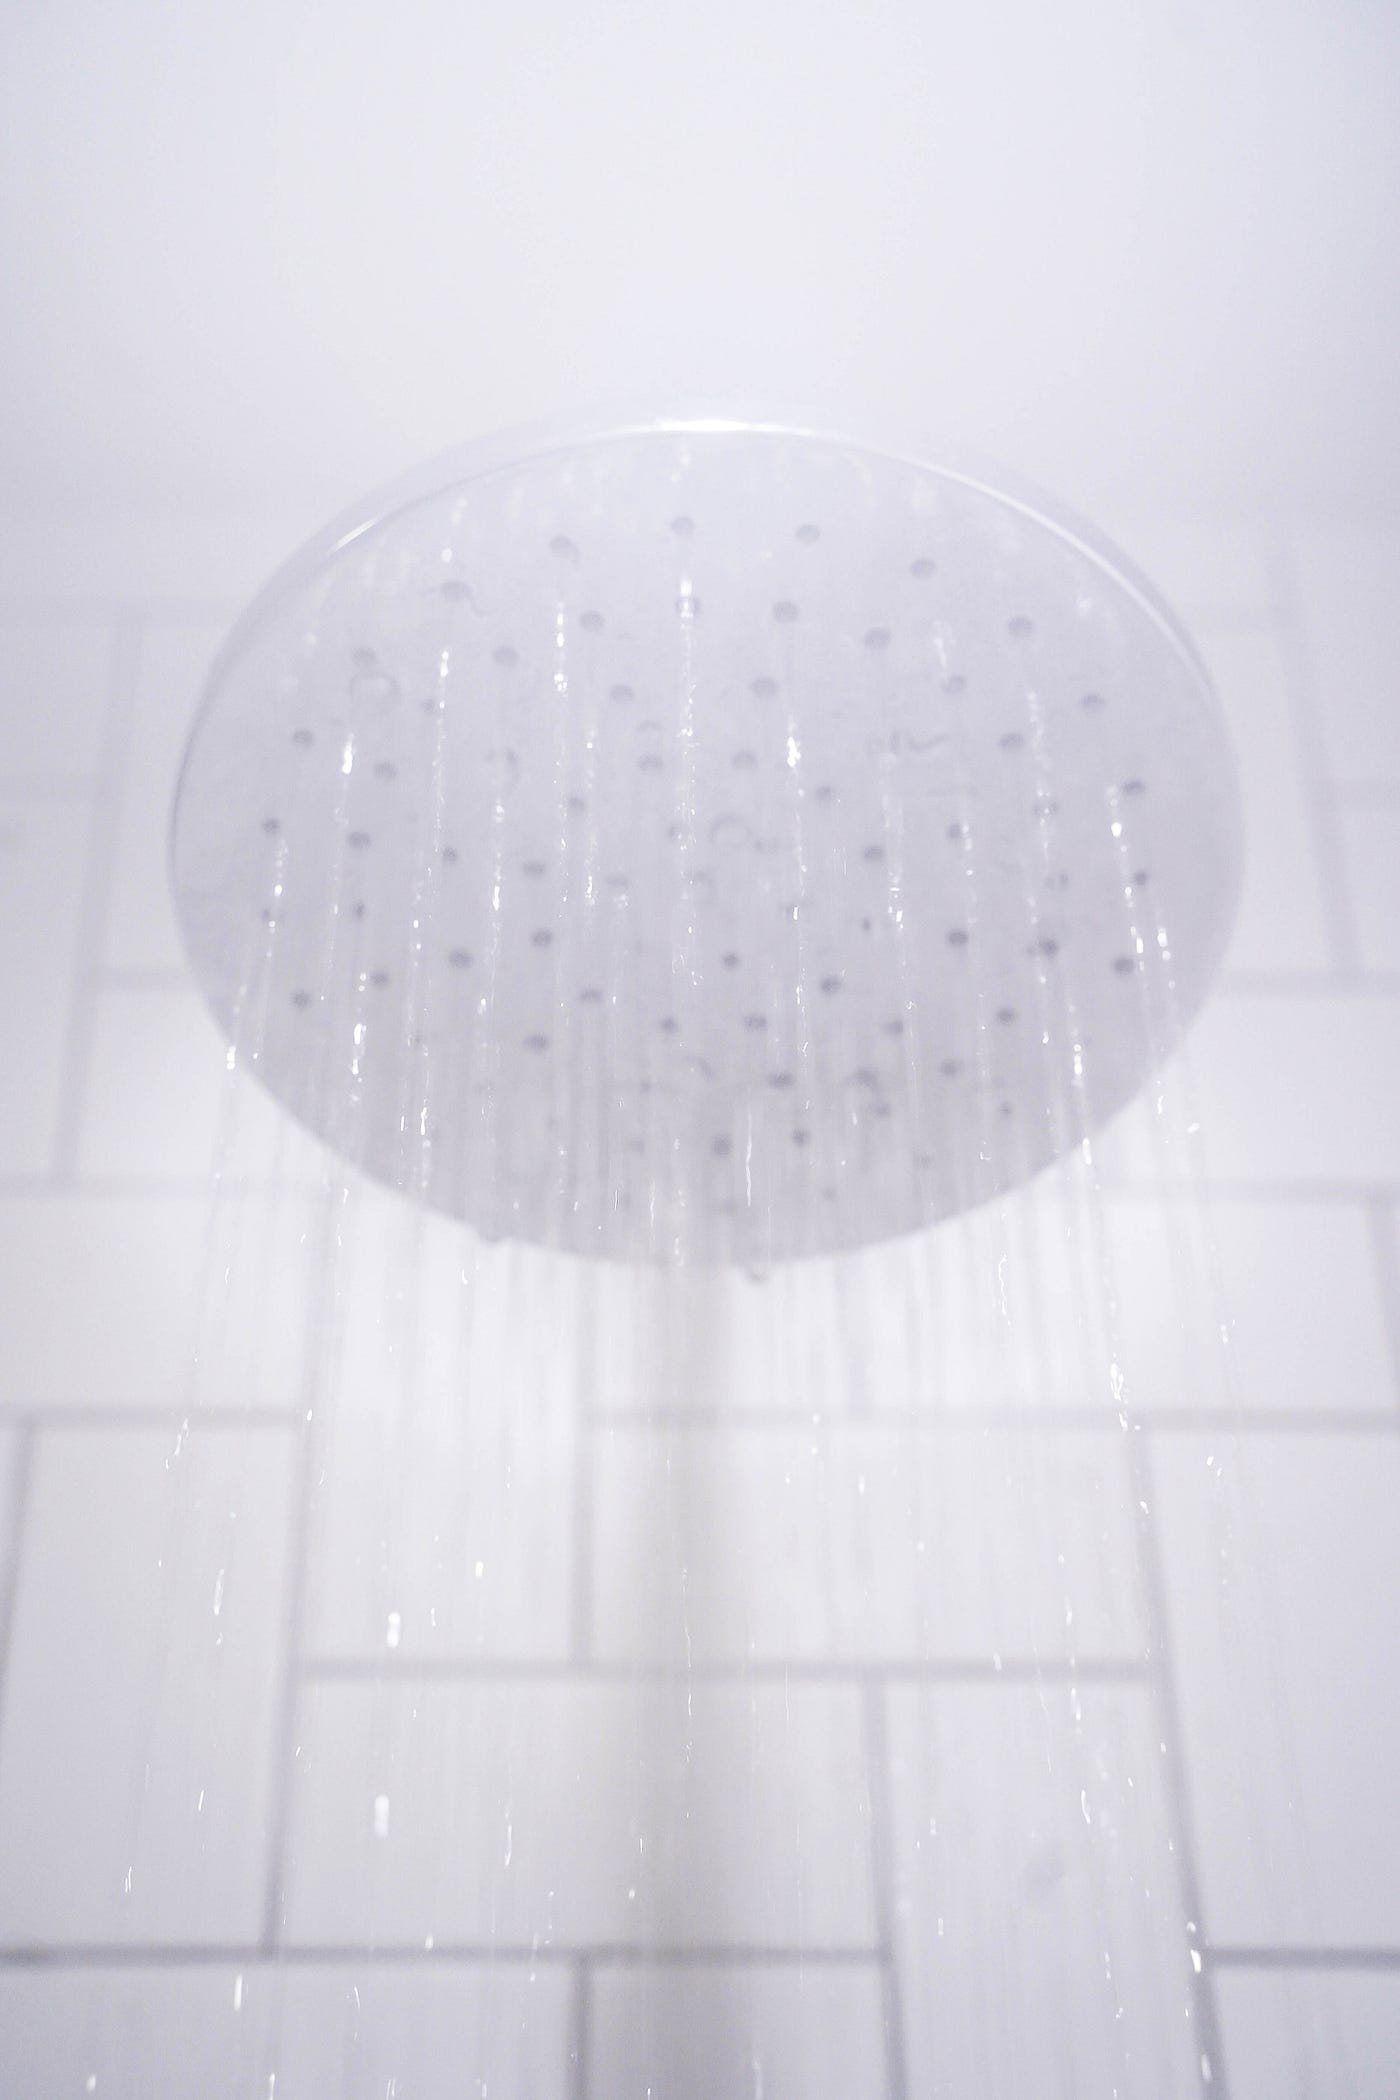 A shower head, seen in closeup, with fog around it. If we are not getting enough sleep, our bodies prioritize deep sleep. I try to facilitate more deep sleep with these tactics: I take a warm shower (or bath) two hours before sleep. I optimize my diet. I sometimes listen to binaural beats before bedtime.